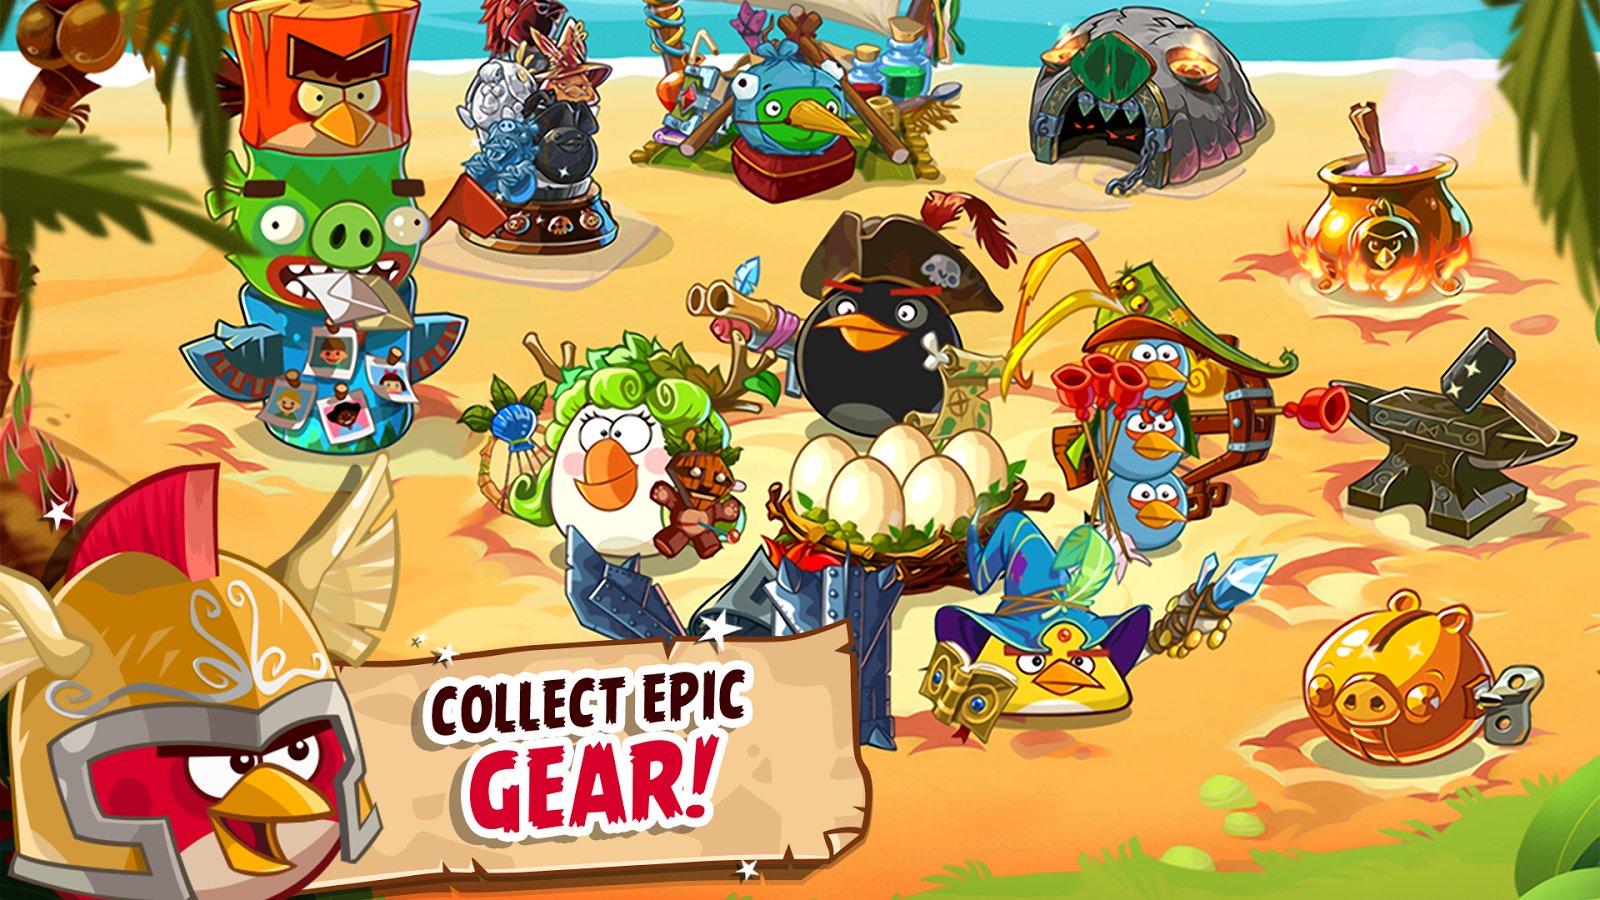 angry-birds-epic-v3-0-27463-4821-apk-for-android